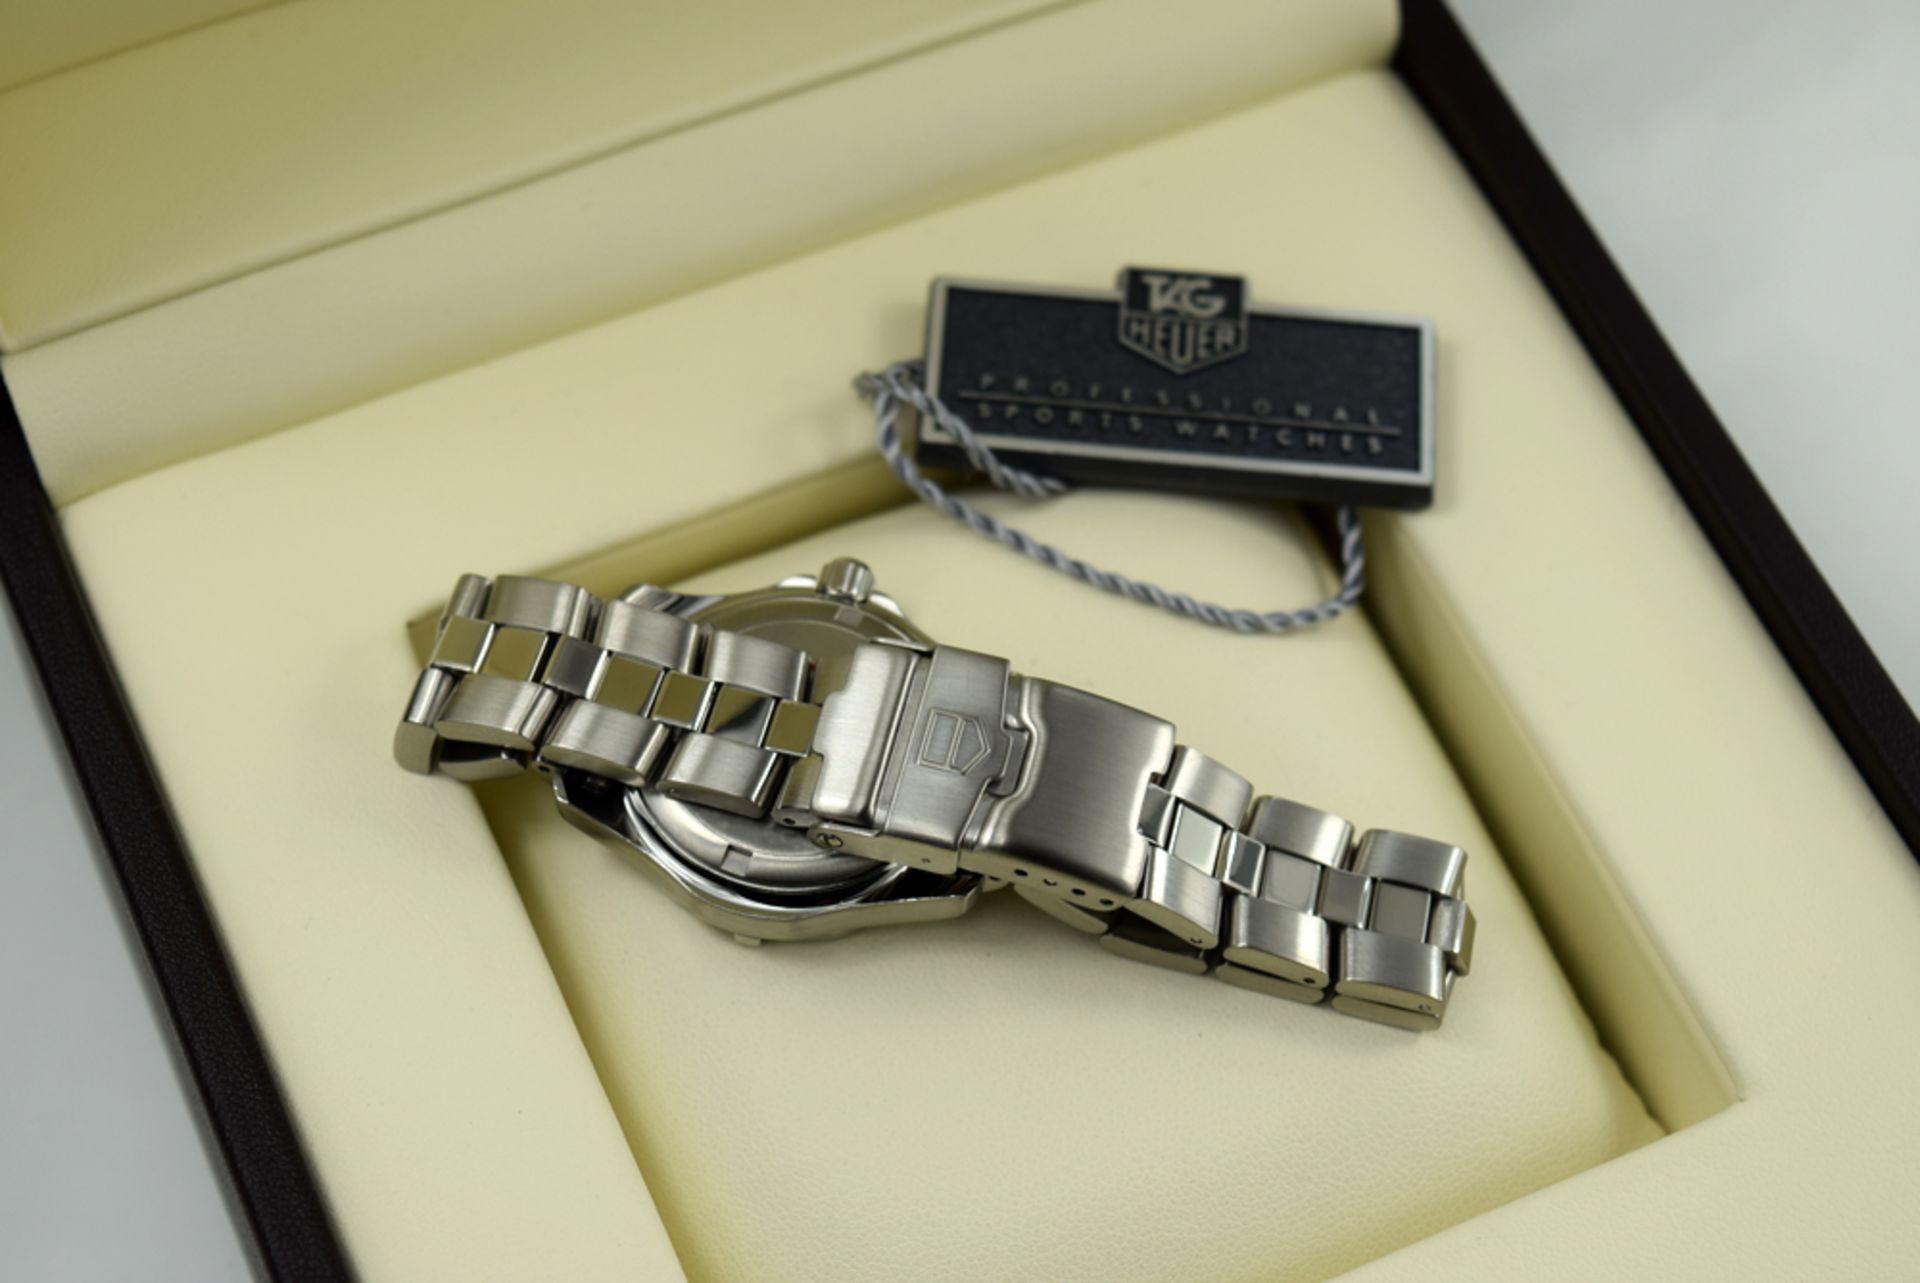 TAG HEUER - 'LADY DATE' PROFESSIONAL 2000 SERIES with DIAMOND DIAL! - Image 6 of 6